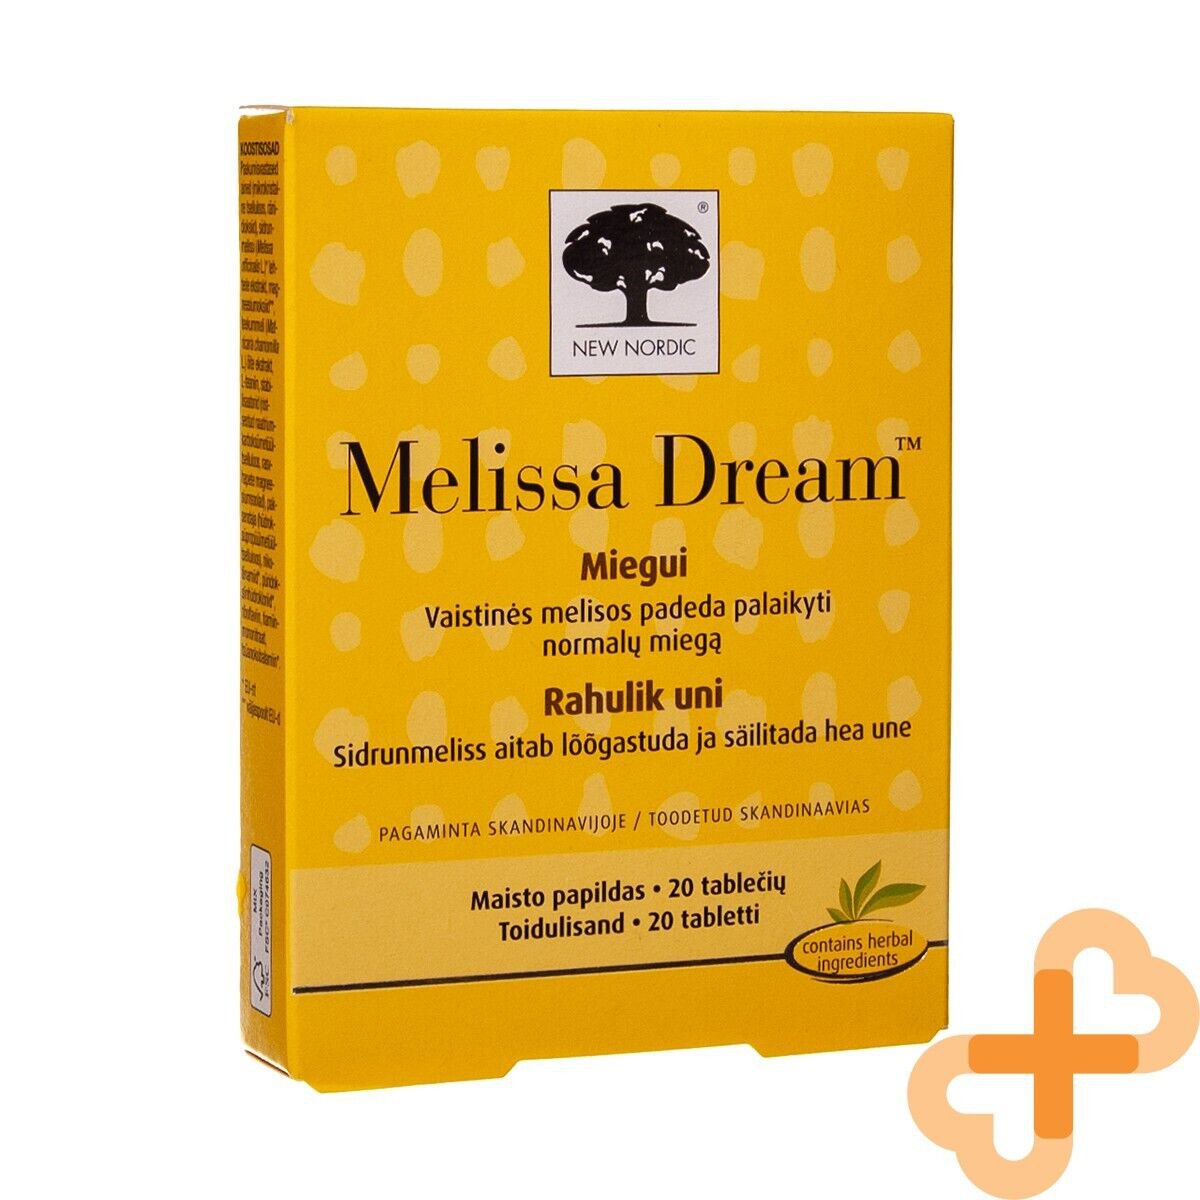 New Nordic Melissa Dream 20 Tablets Helps To Relax And Sleep Better